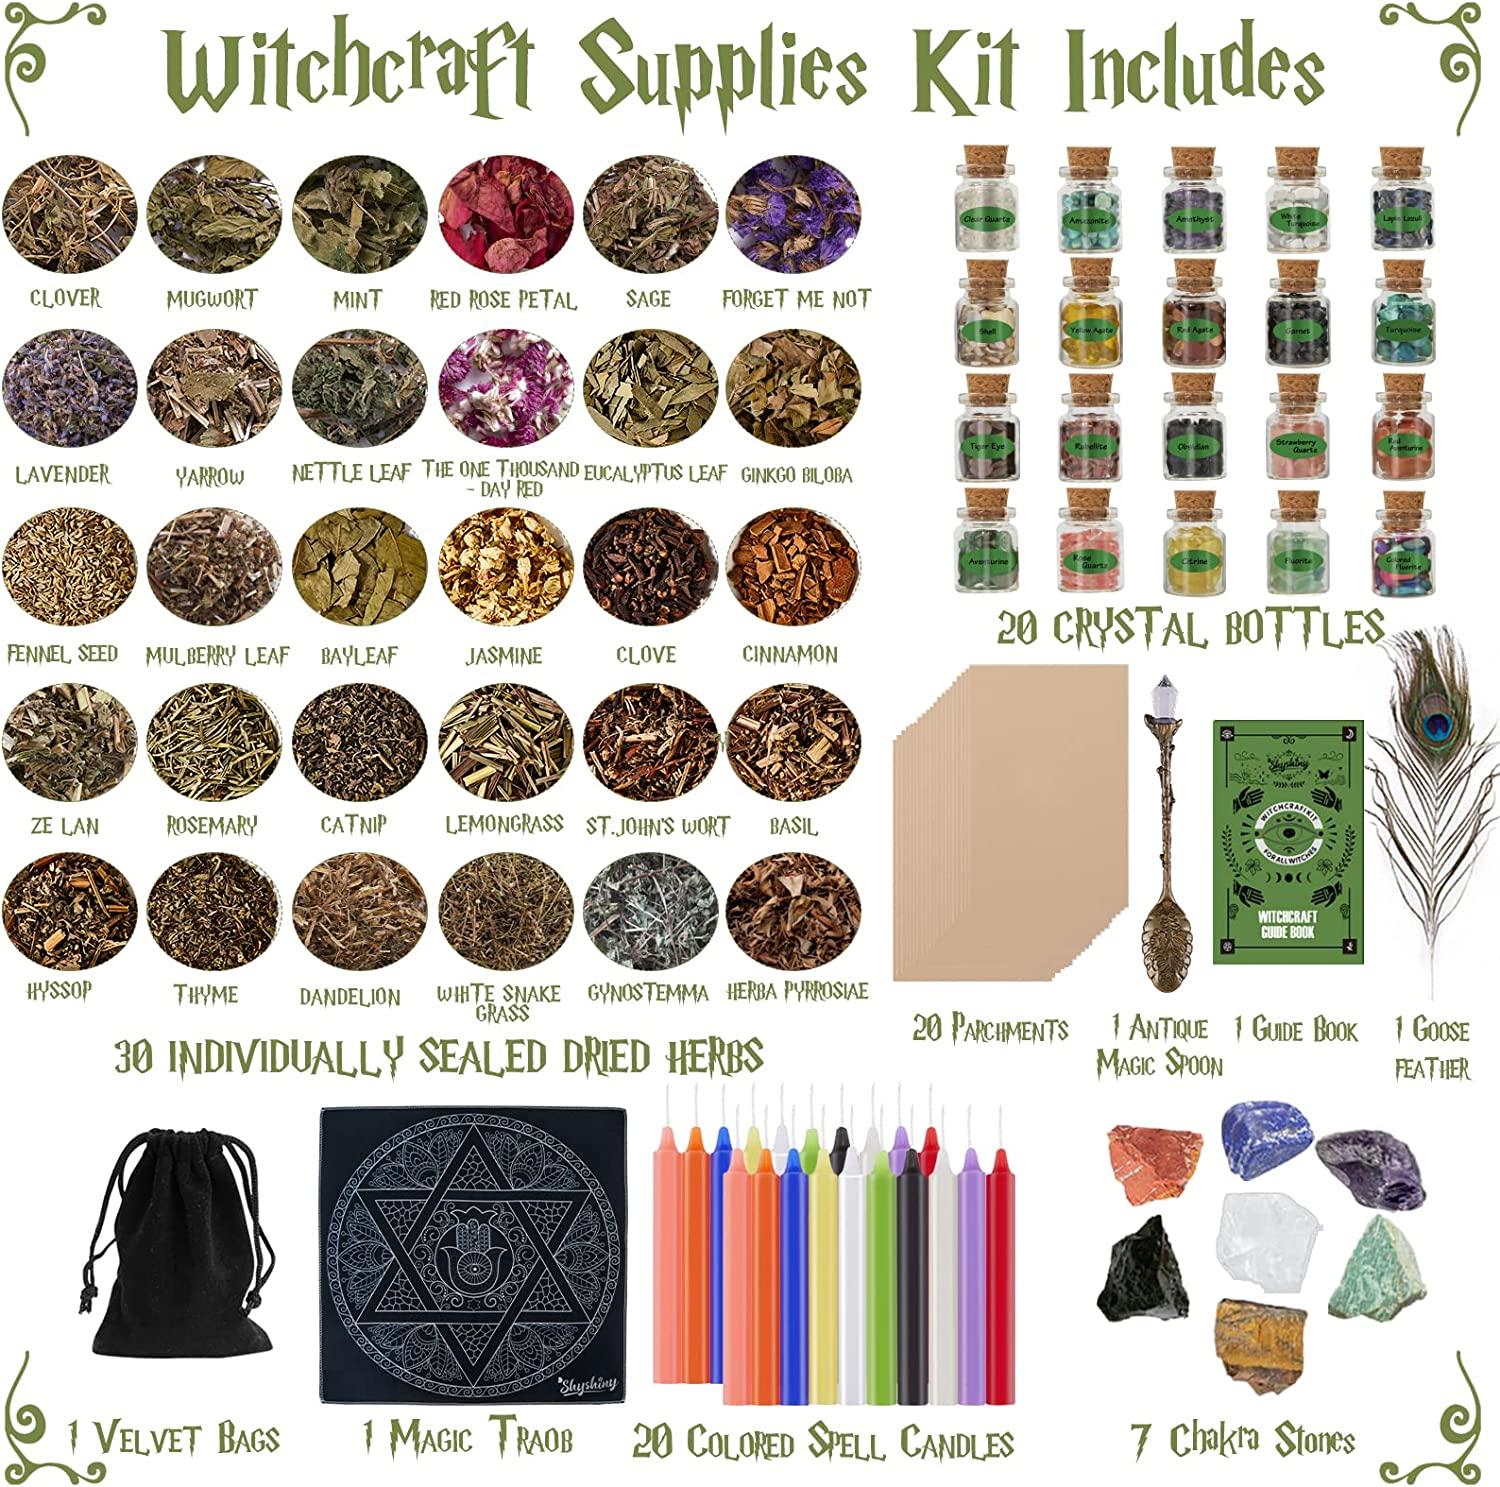 Witchcraft Herbs Kit 30 Dried Herb Witchcraft Supplies Crystal Spoon Herb  Kit For Wiccan Rituals Magical Spells